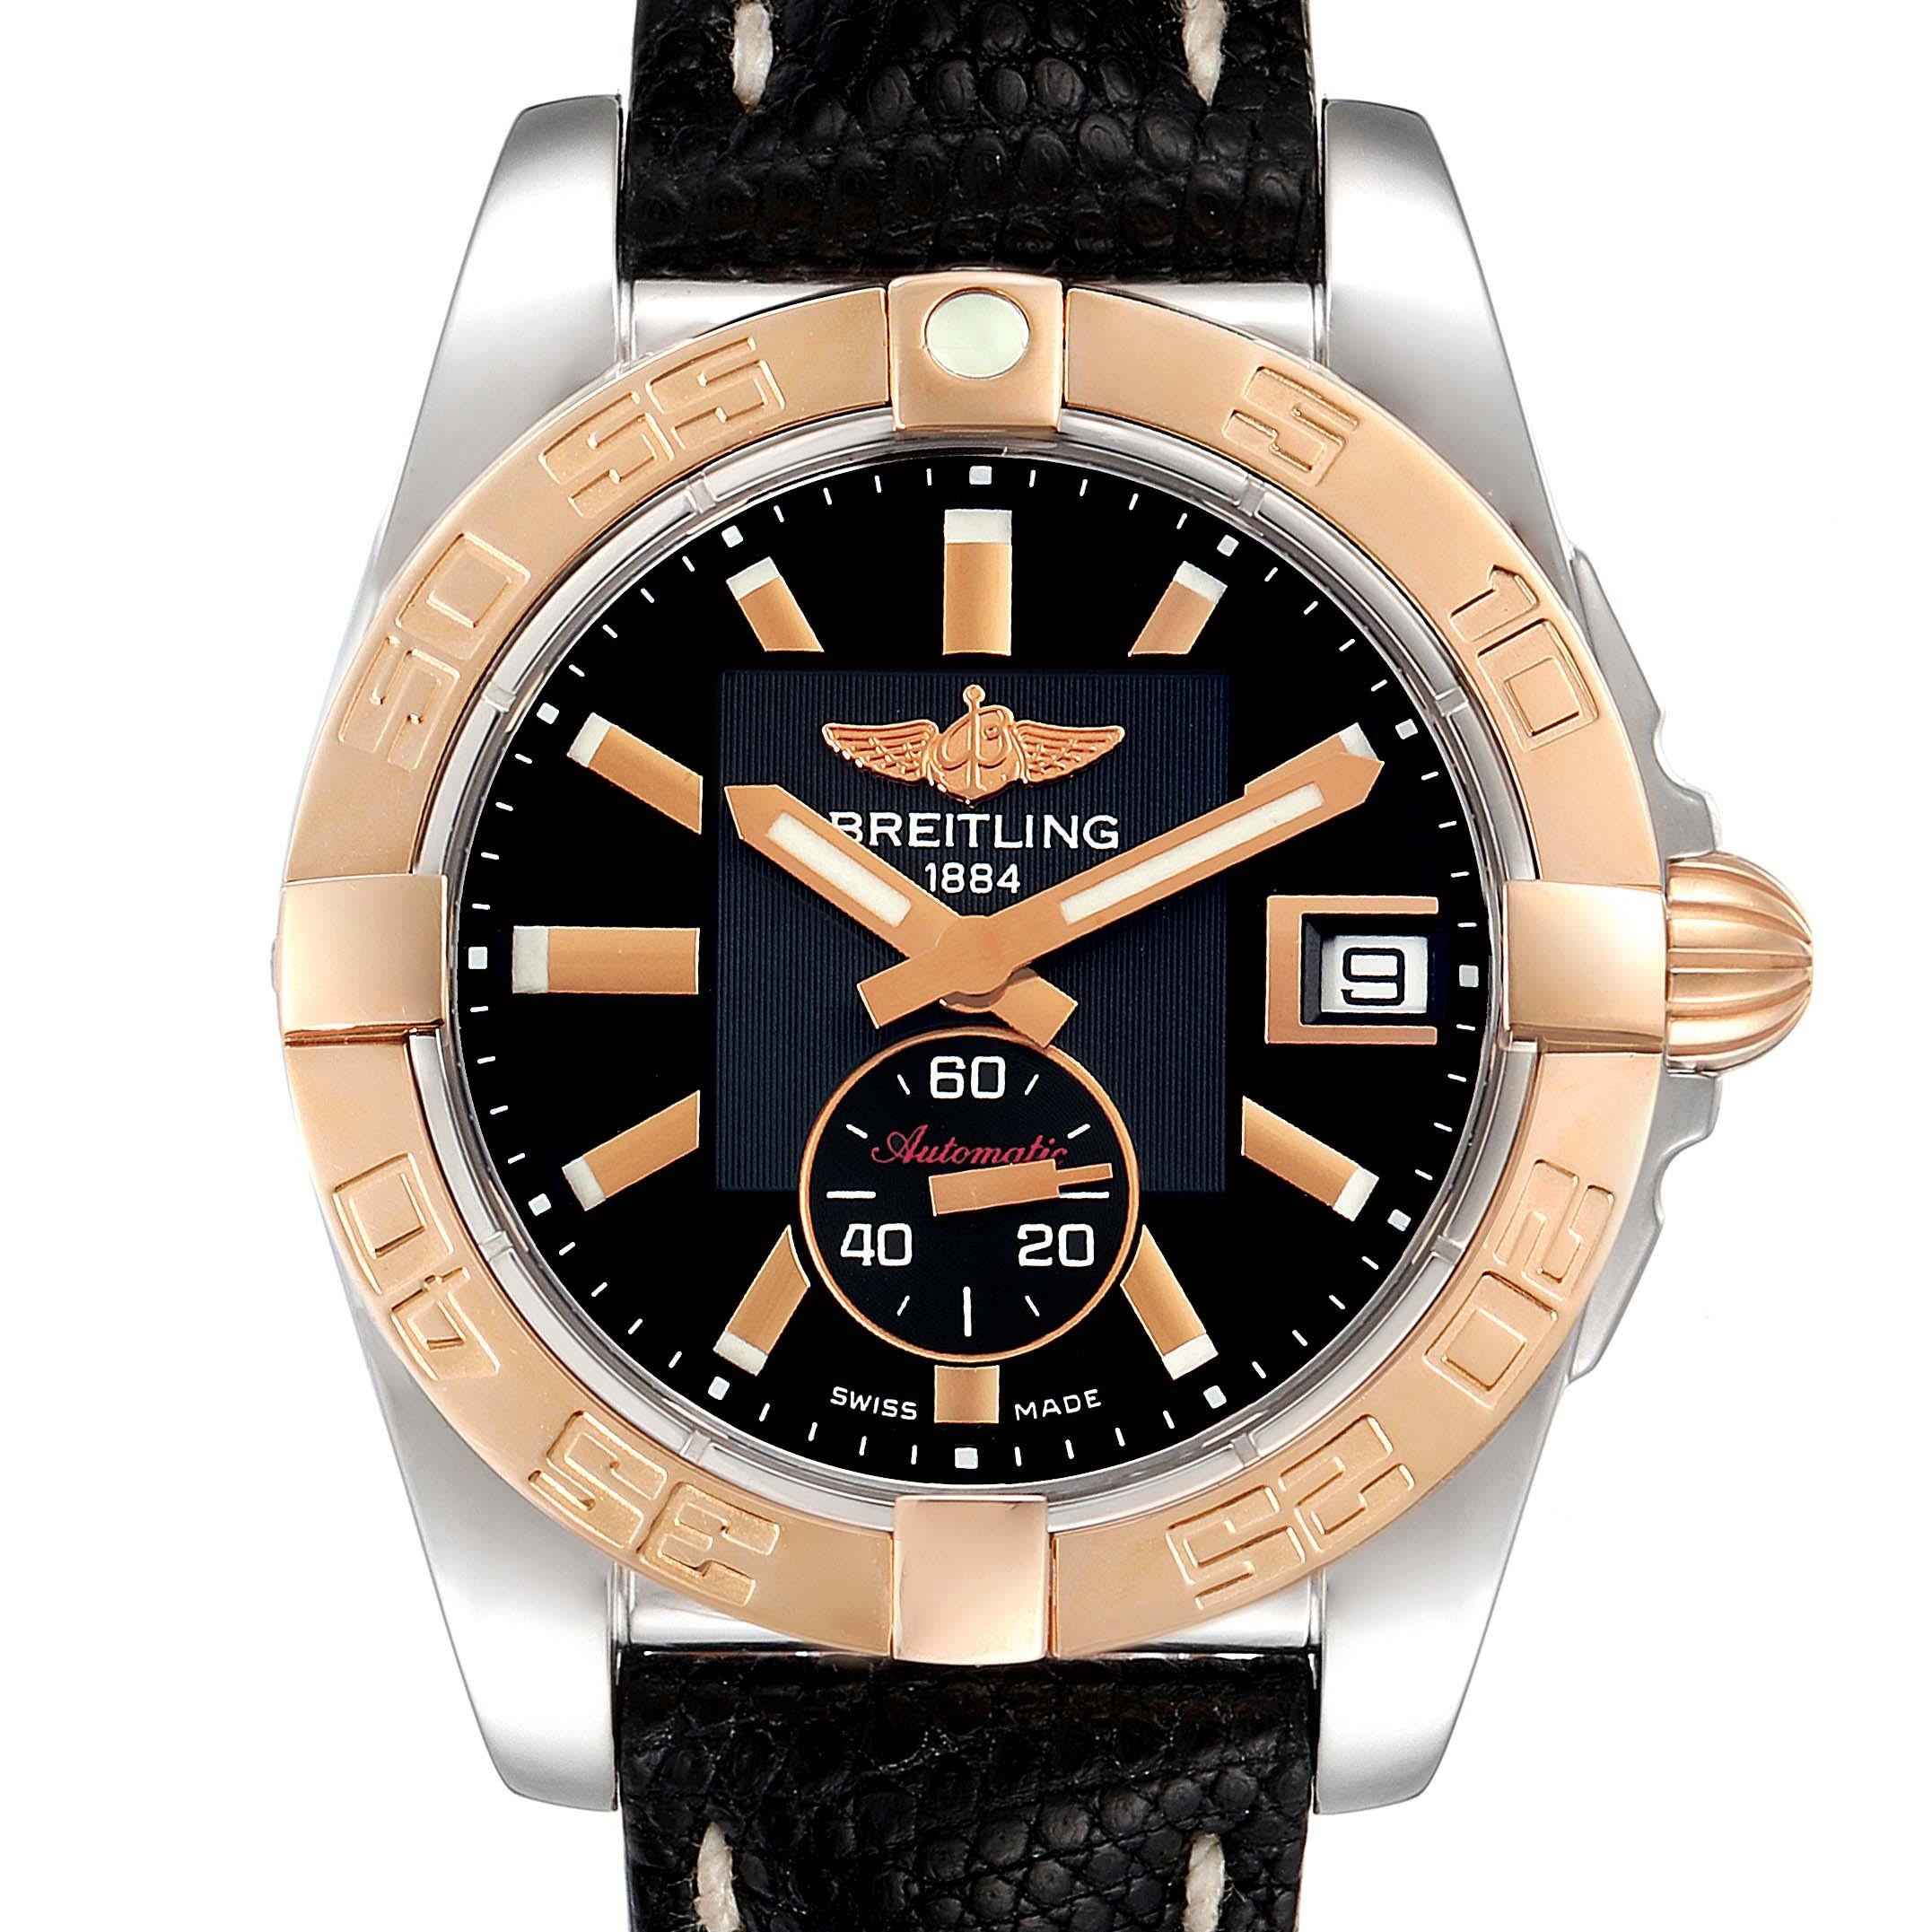 Breitling Galactic 36 Stainless Steel Rose Gold Watch C37330. Self-winding automatic officially certified chronometer movement. Stainless steel and 18K rose gold case 36.0 mm in diameter. 18k rose gold ratcheted unidirectional rotating bezel.